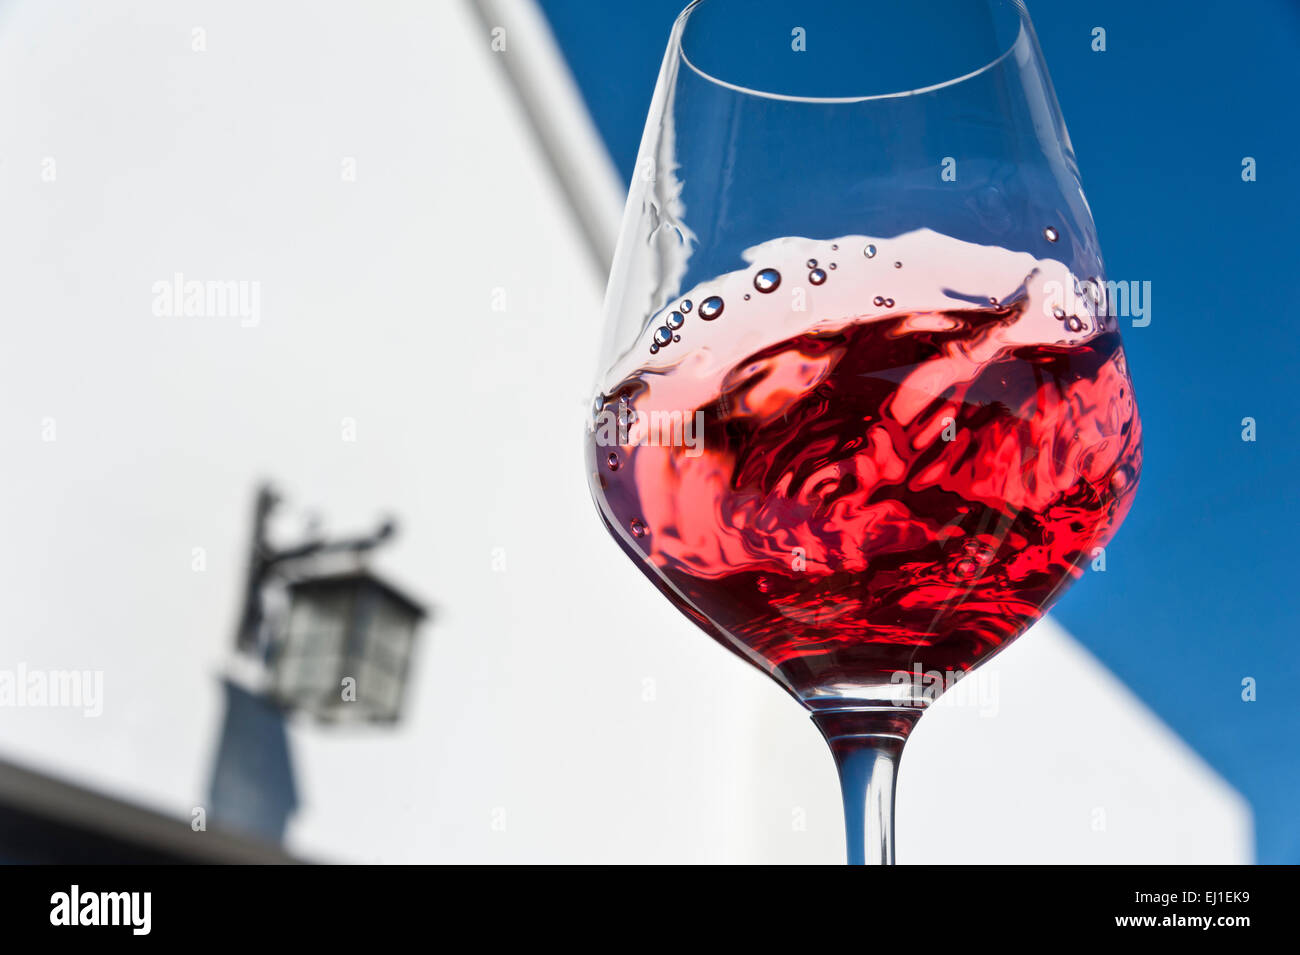 RED WINE TASTING ALFRESCO SUN SKY GRAPHIC  Swirling and evaluating a glass of red wine in outdoor alfresco sunny wine tasting situation Stock Photo